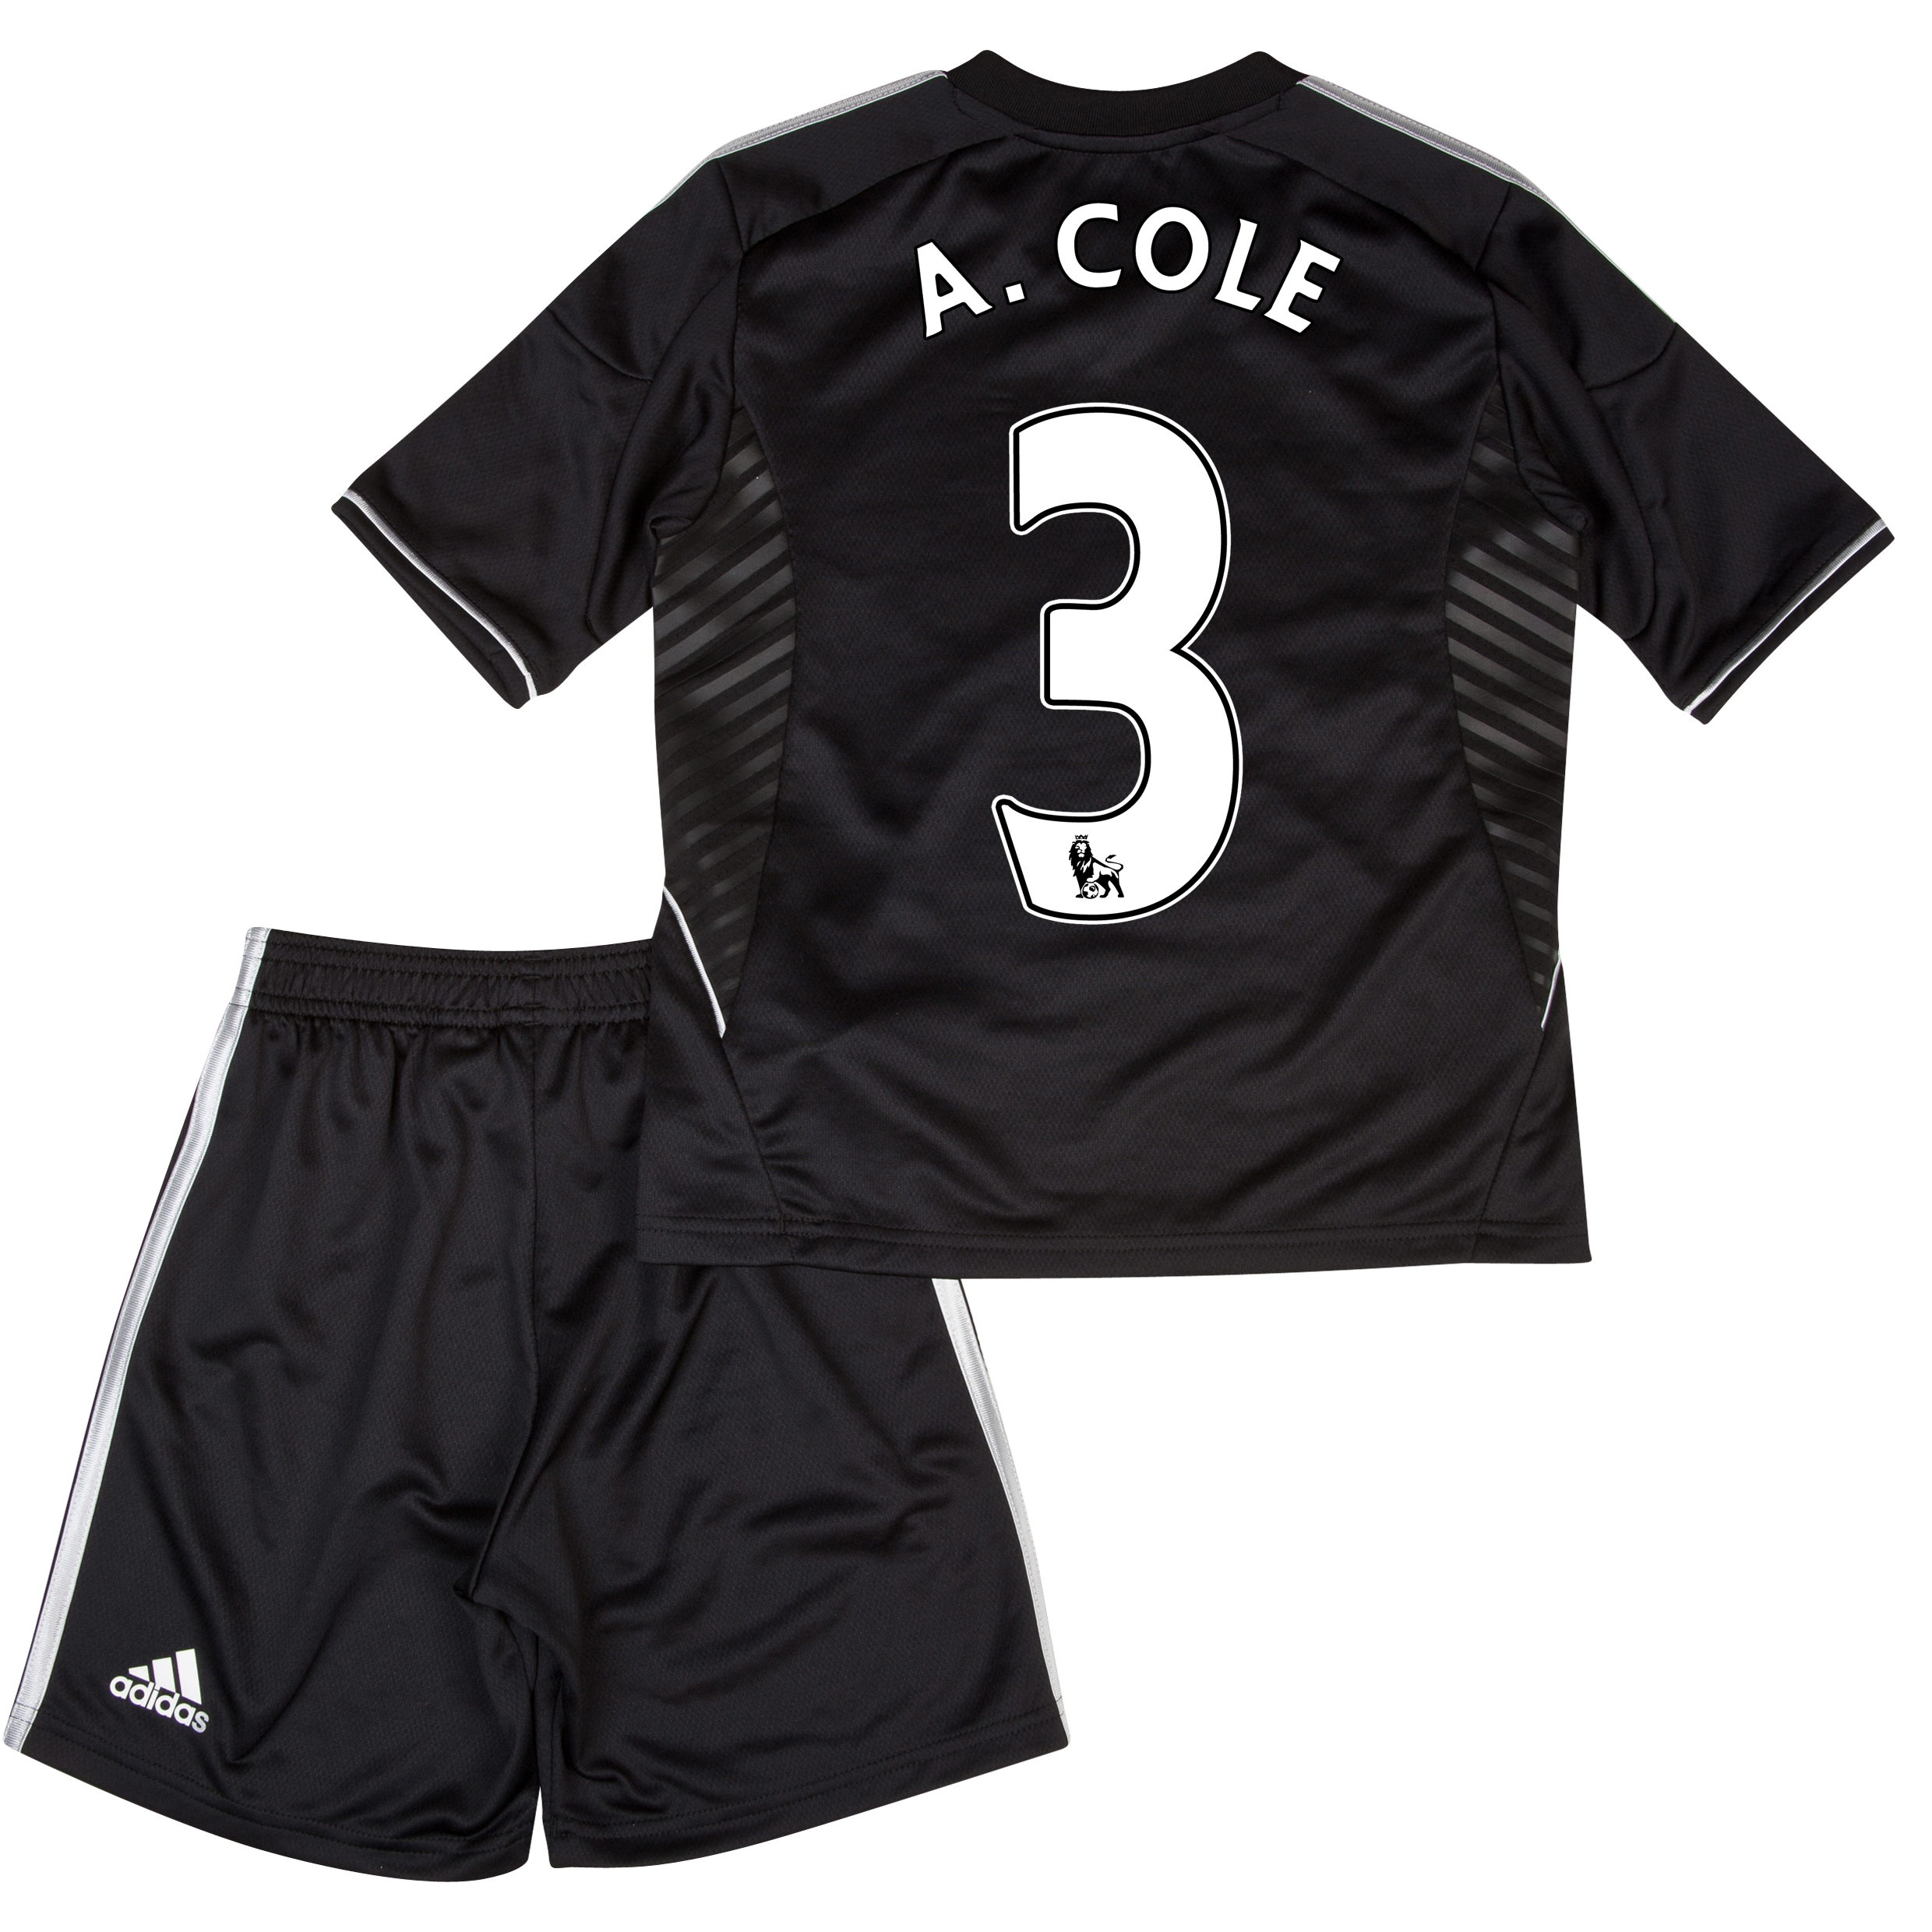 Chelsea Third Mini Kit 2013/14 with A.Cole 3 printing